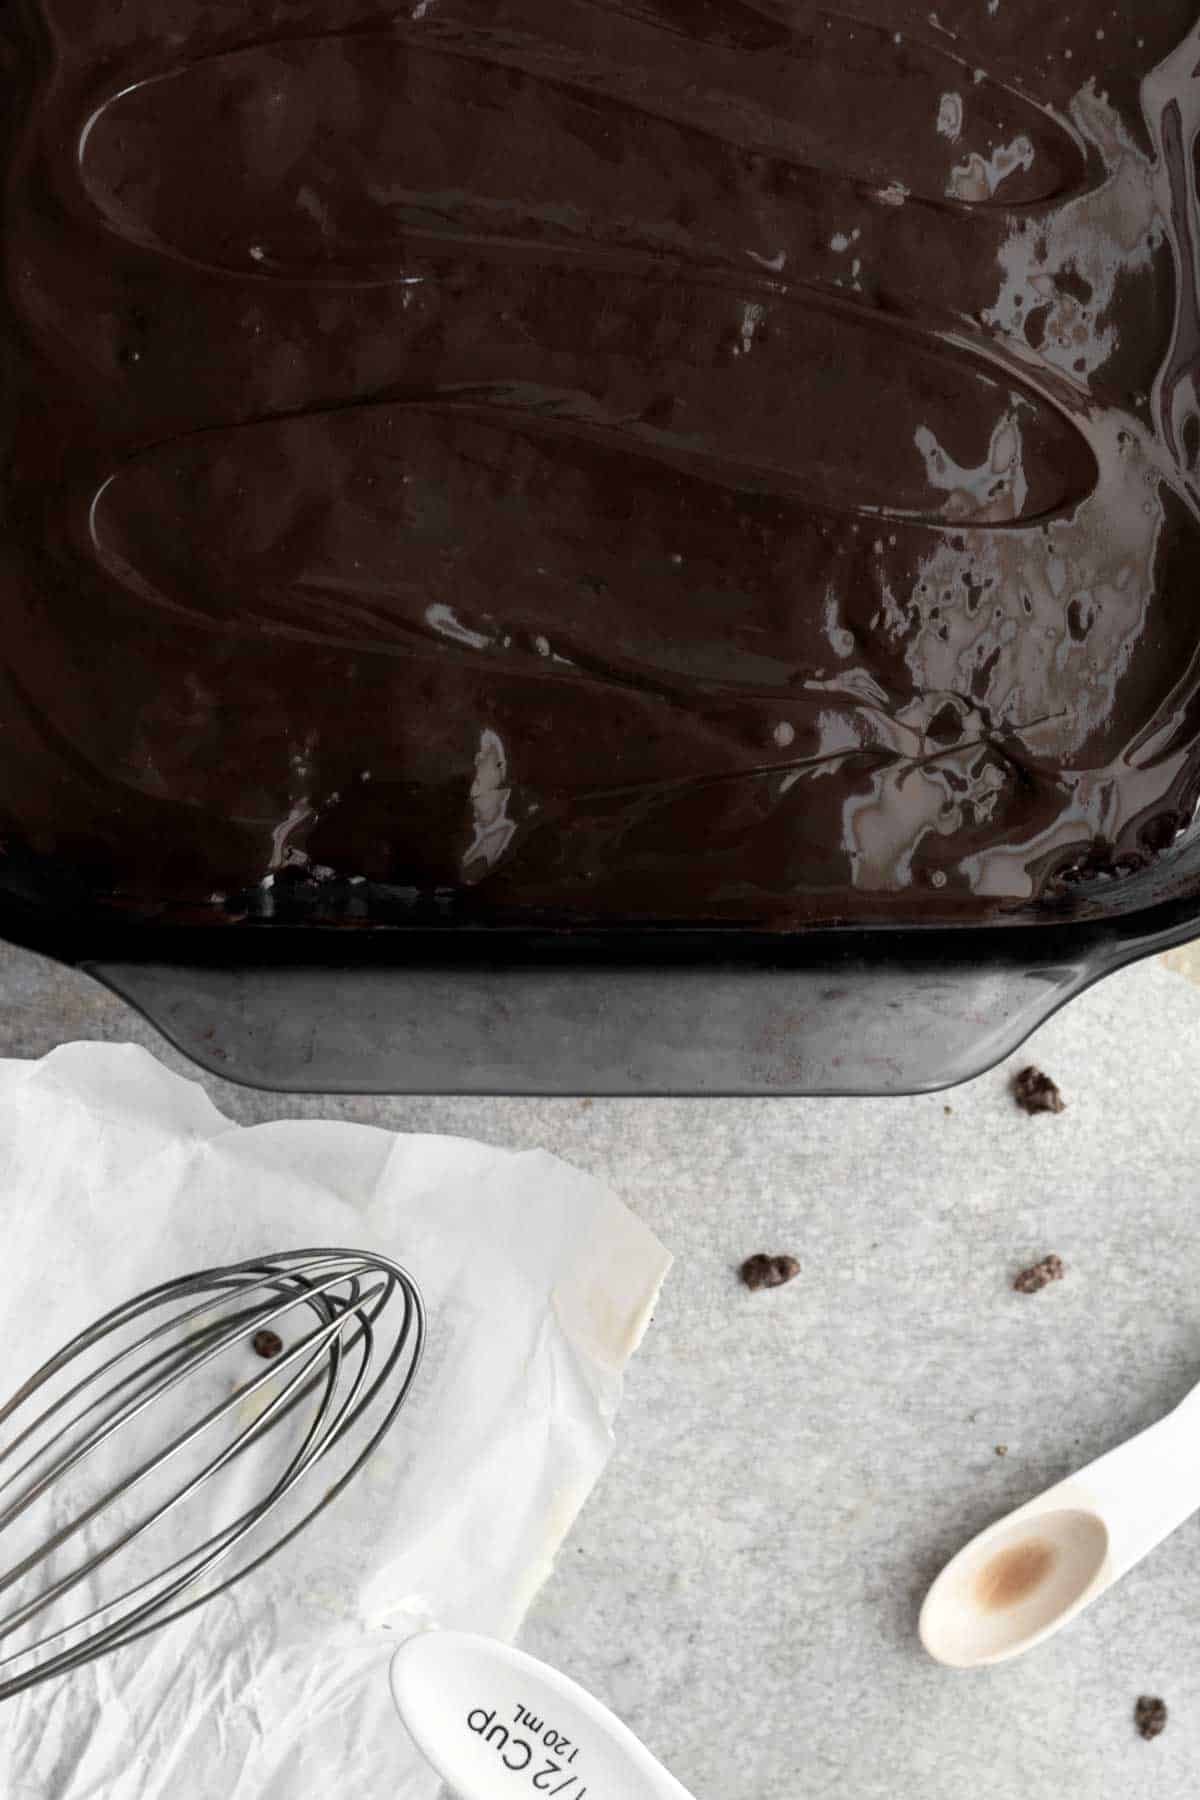 Adding a layer of warm chocolate on top.